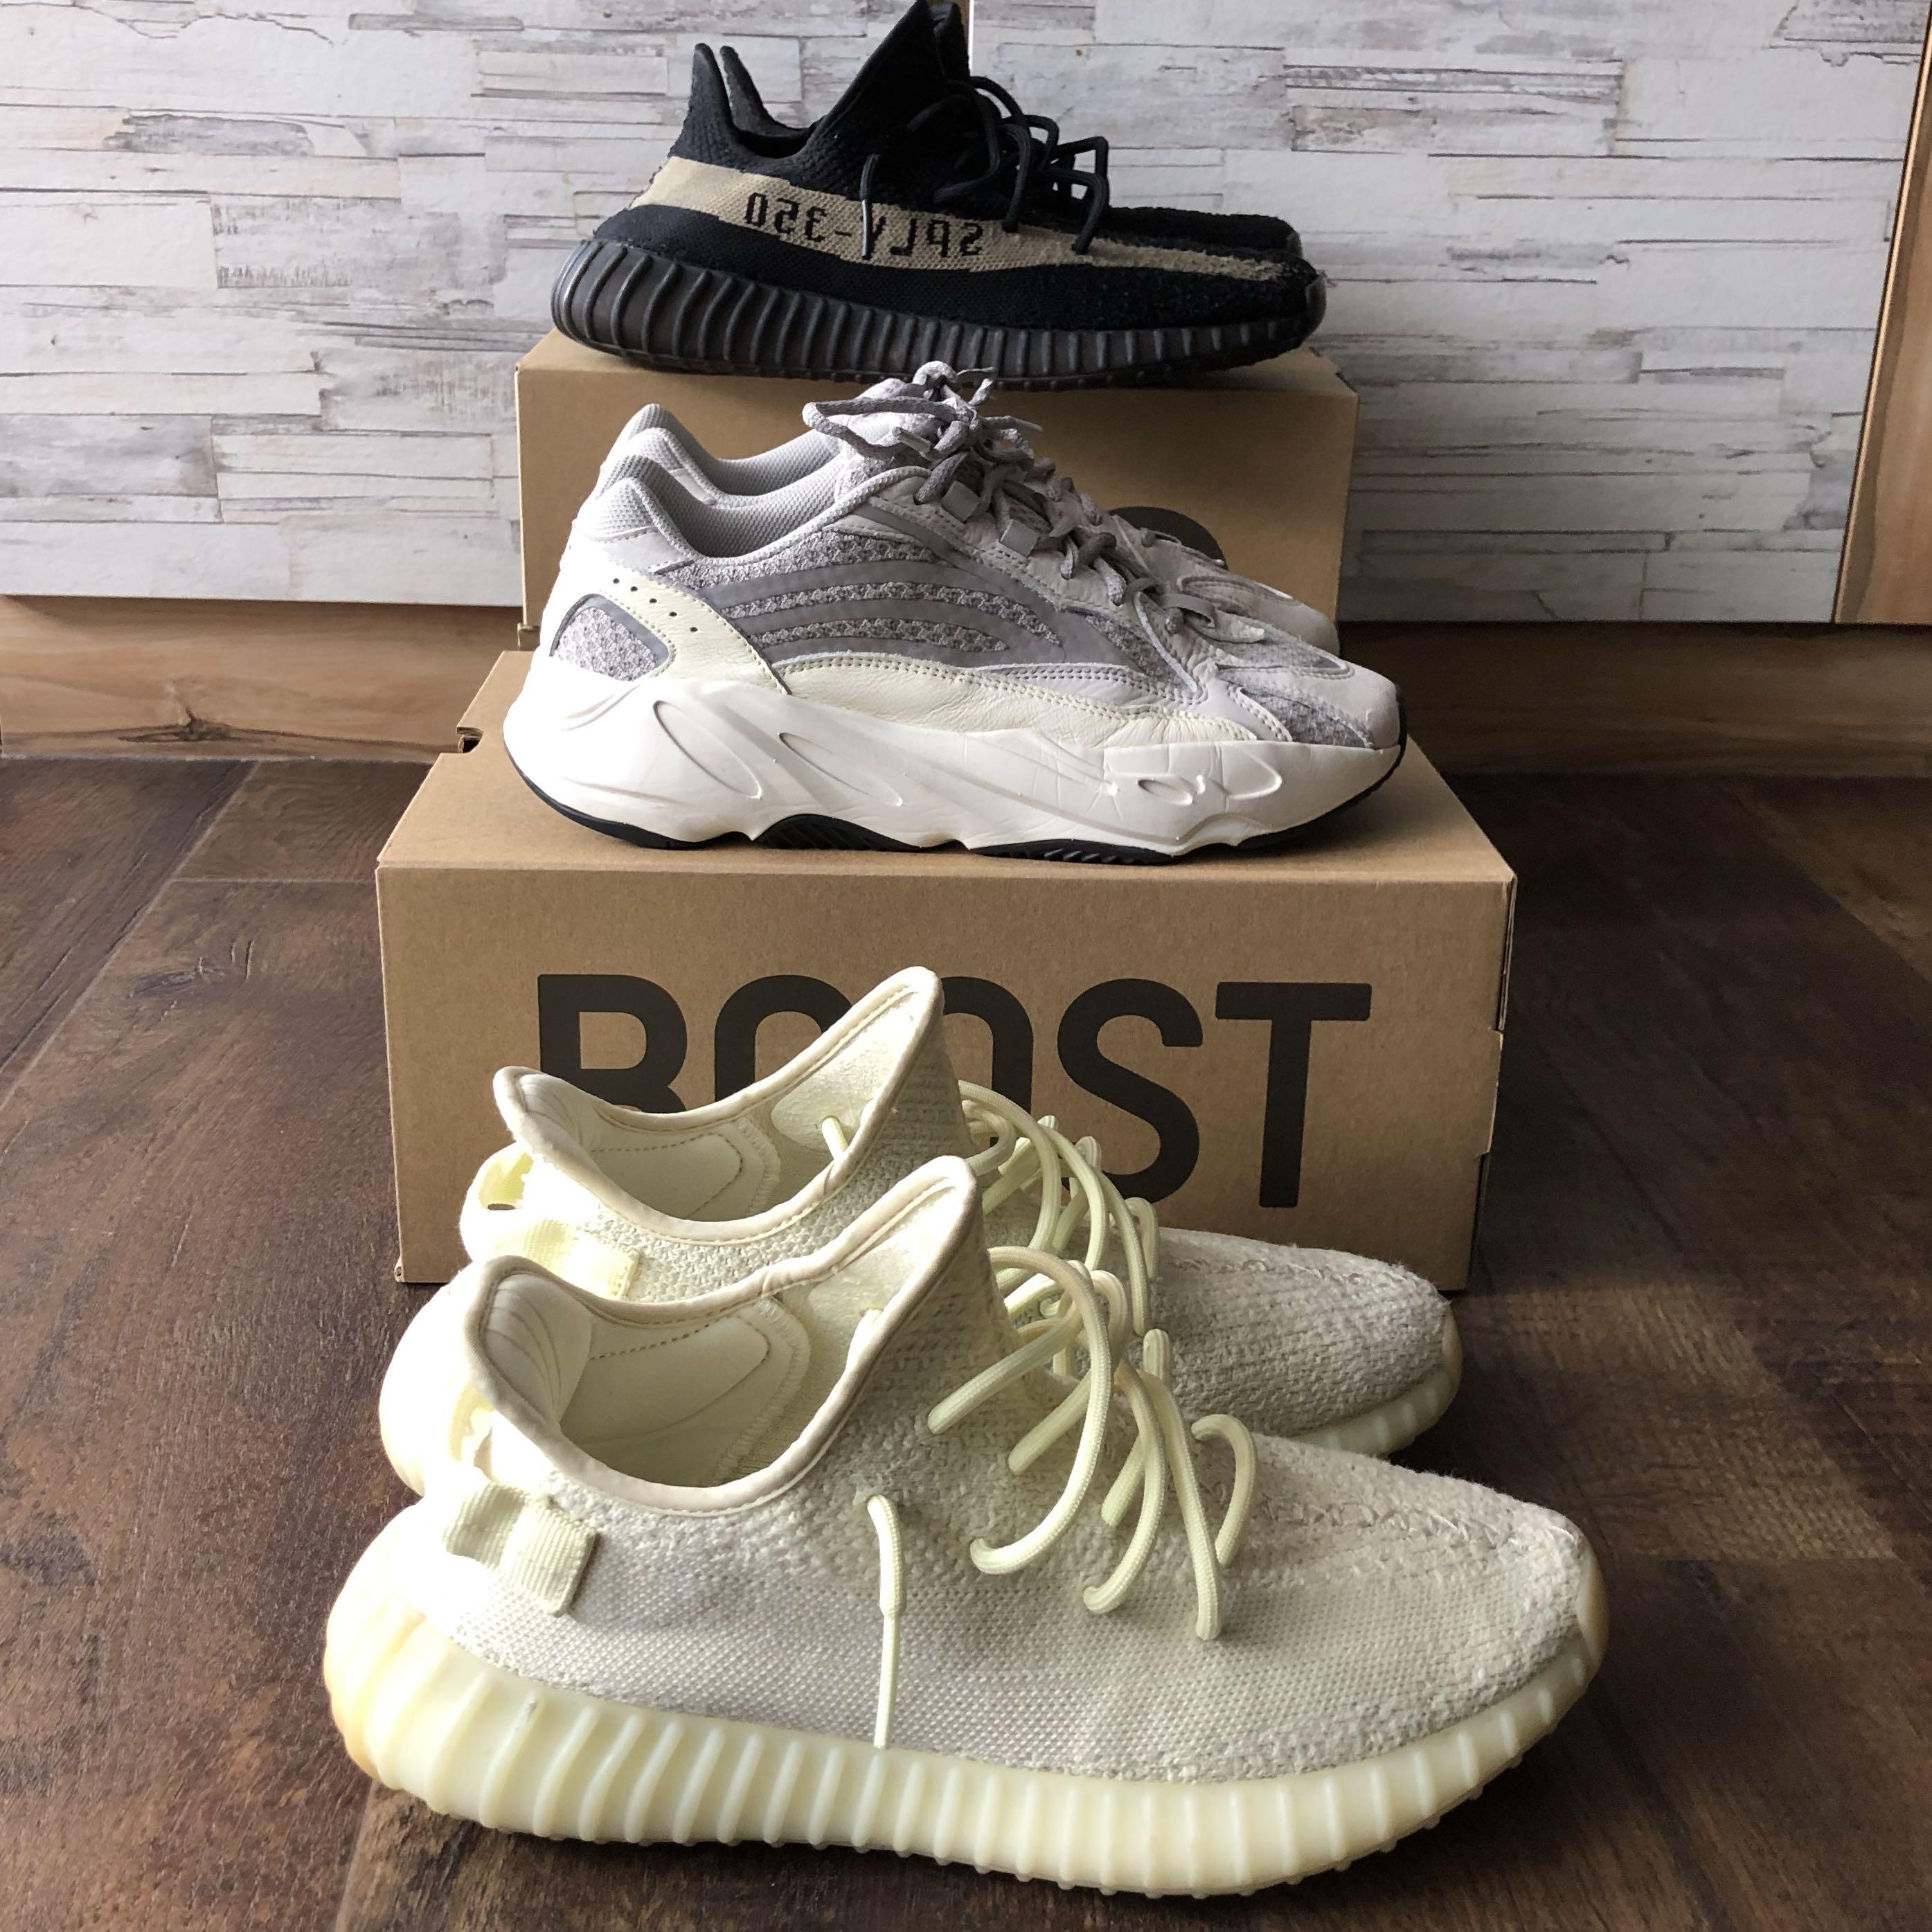 yeezy static butter